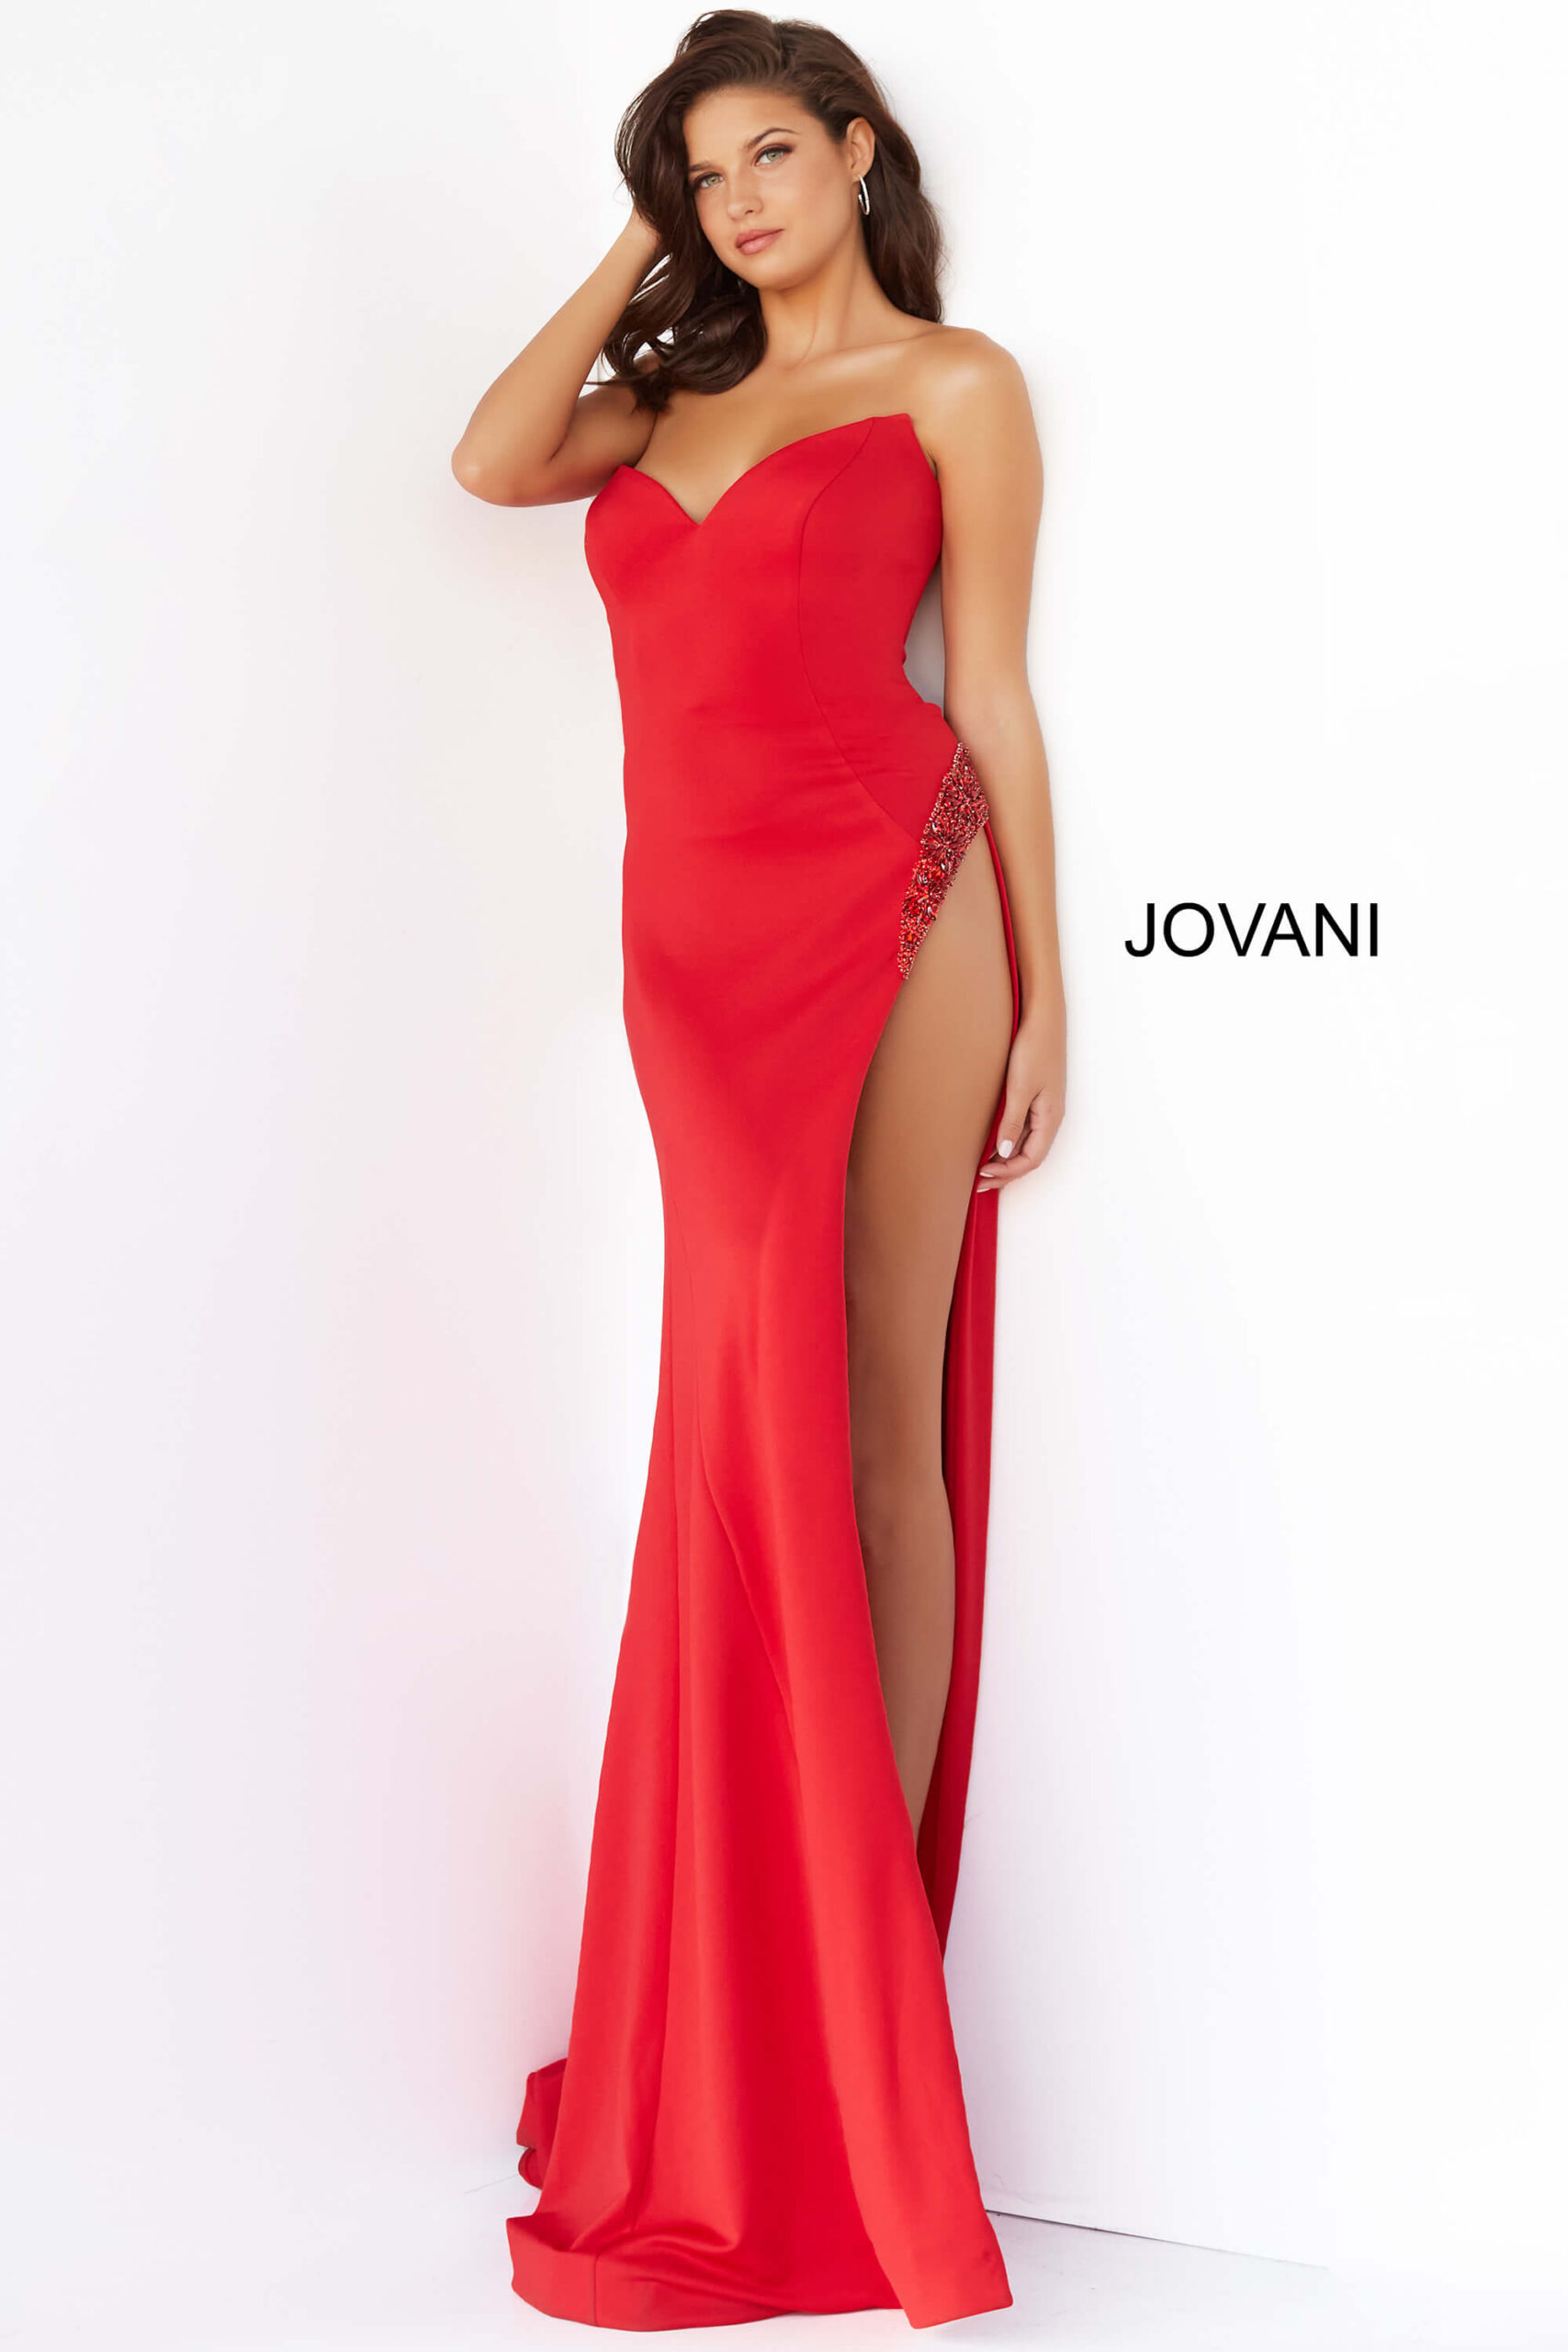 Jovani 07138 Red High Slit Couture Dress